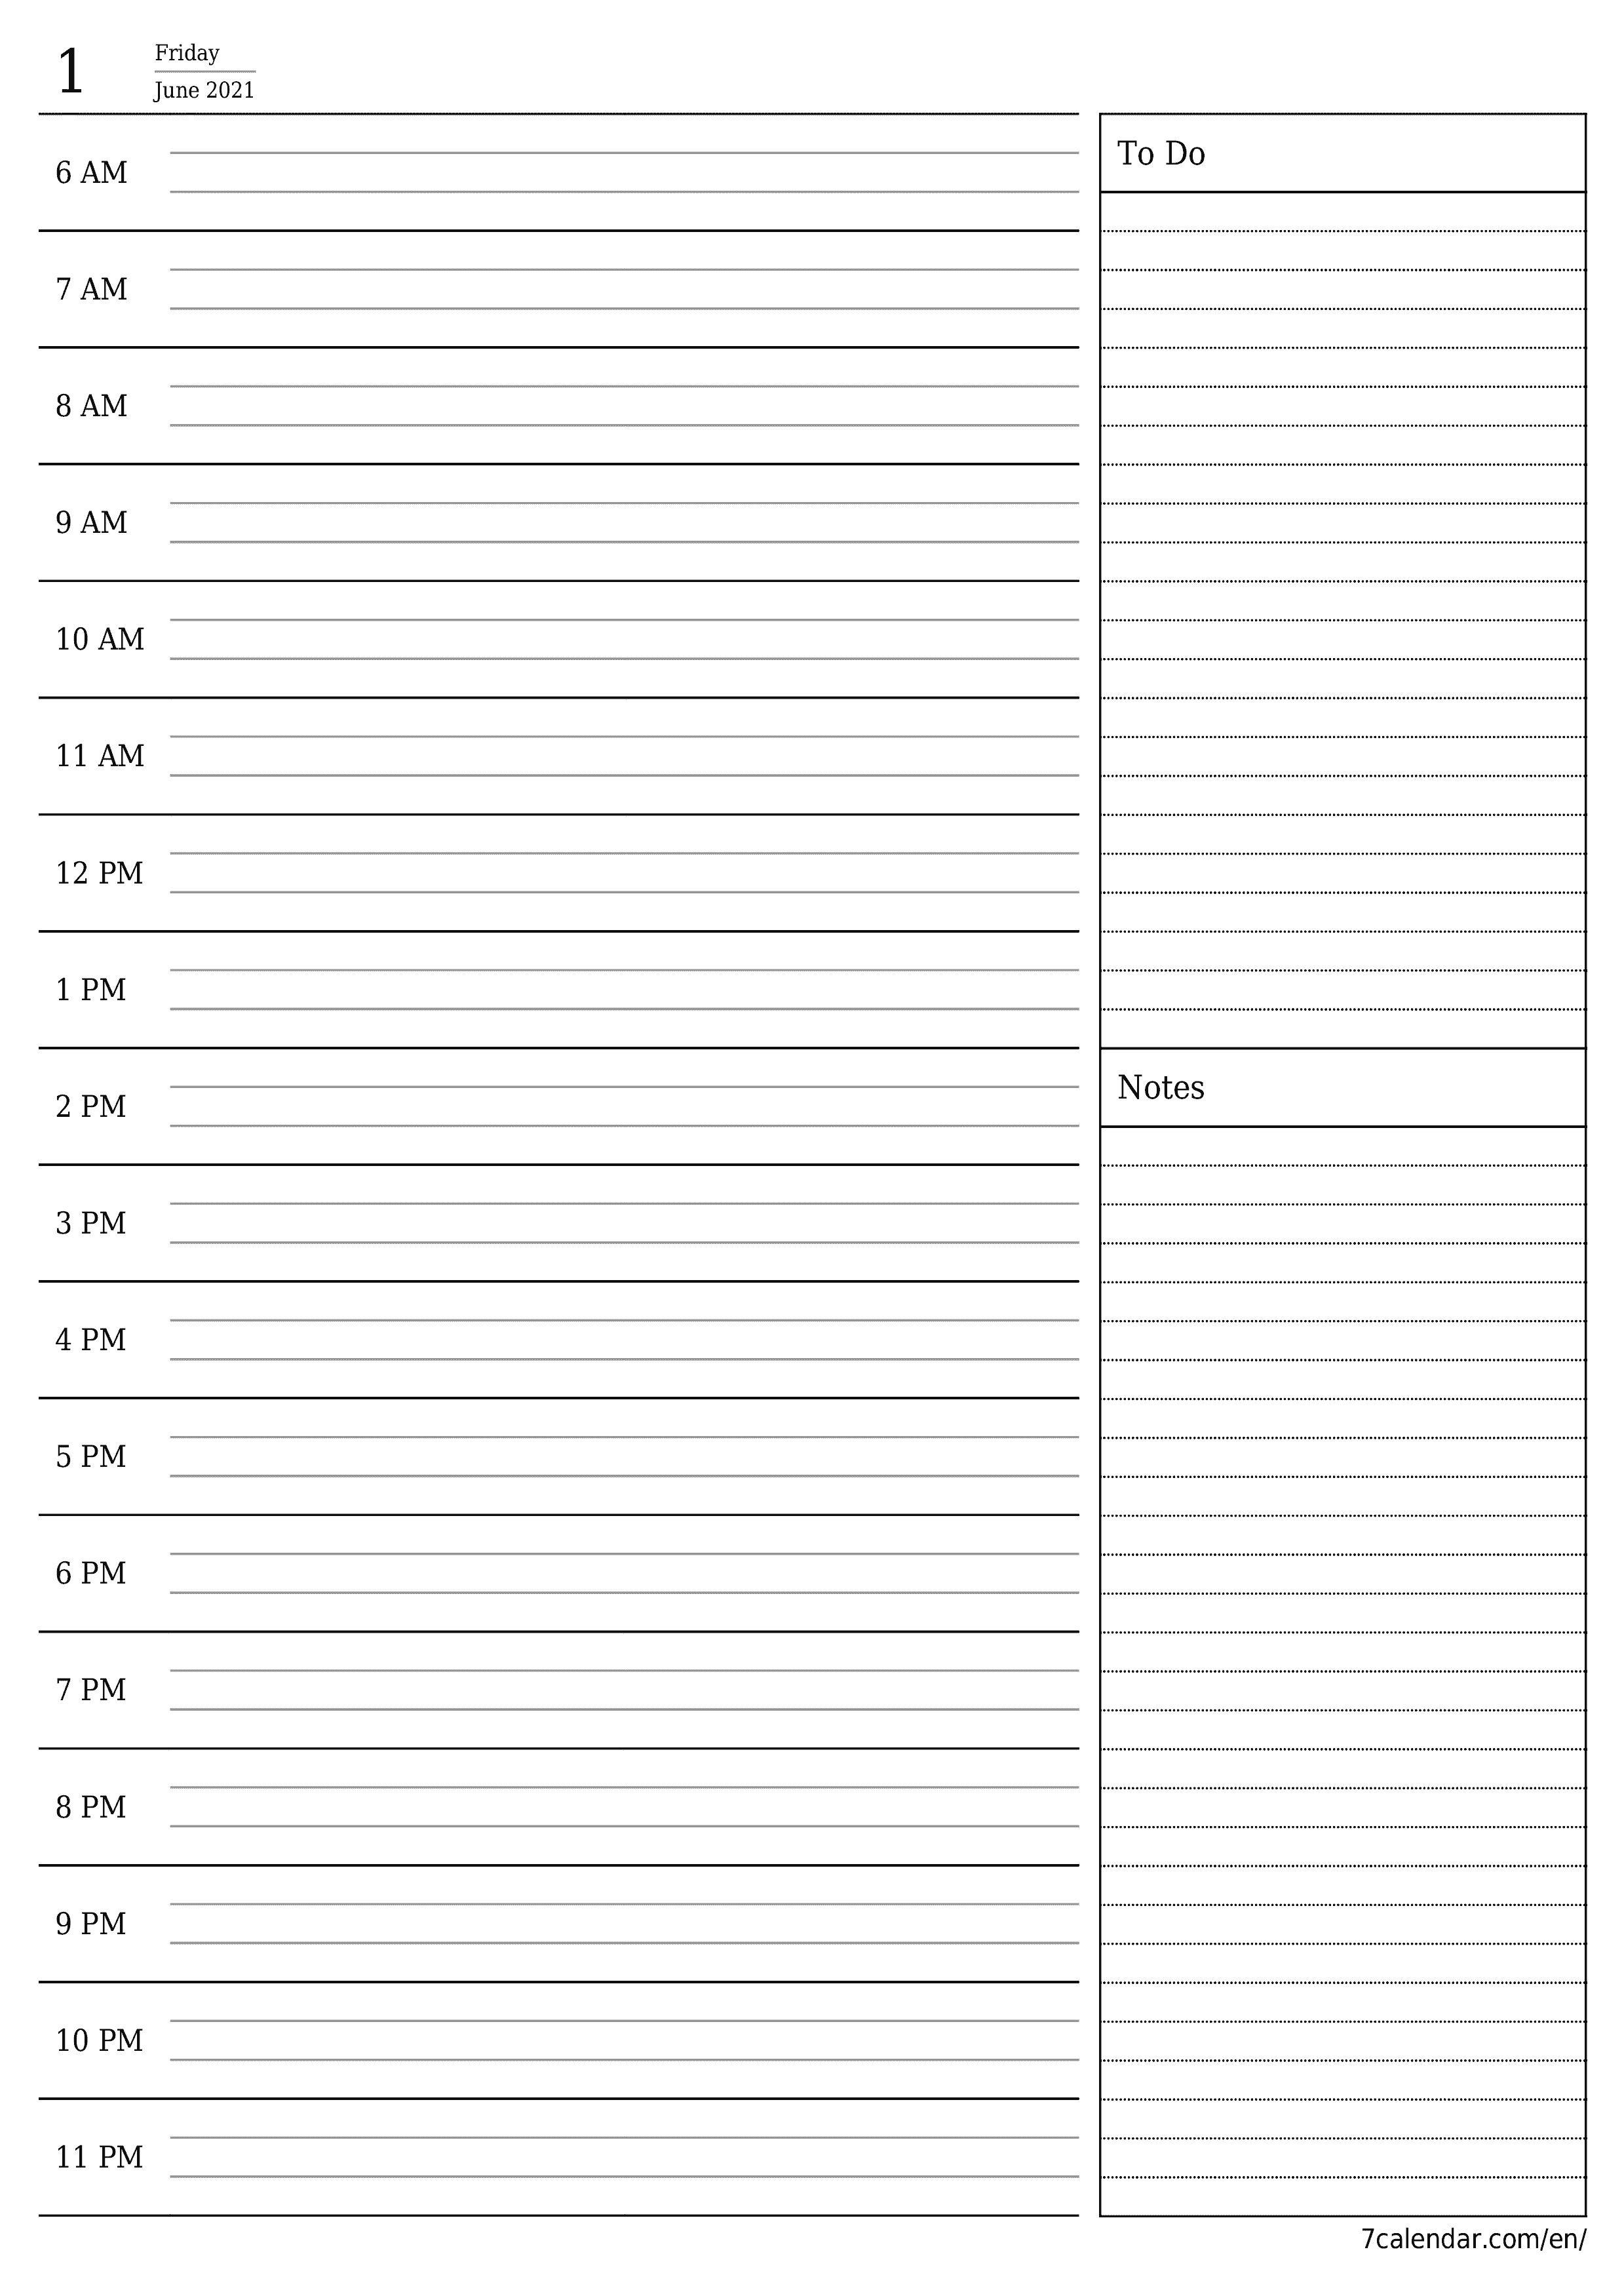 Blank daily calendar planner for day June 2021 with notes, save and print to PDF PNG English - 7calendar.com